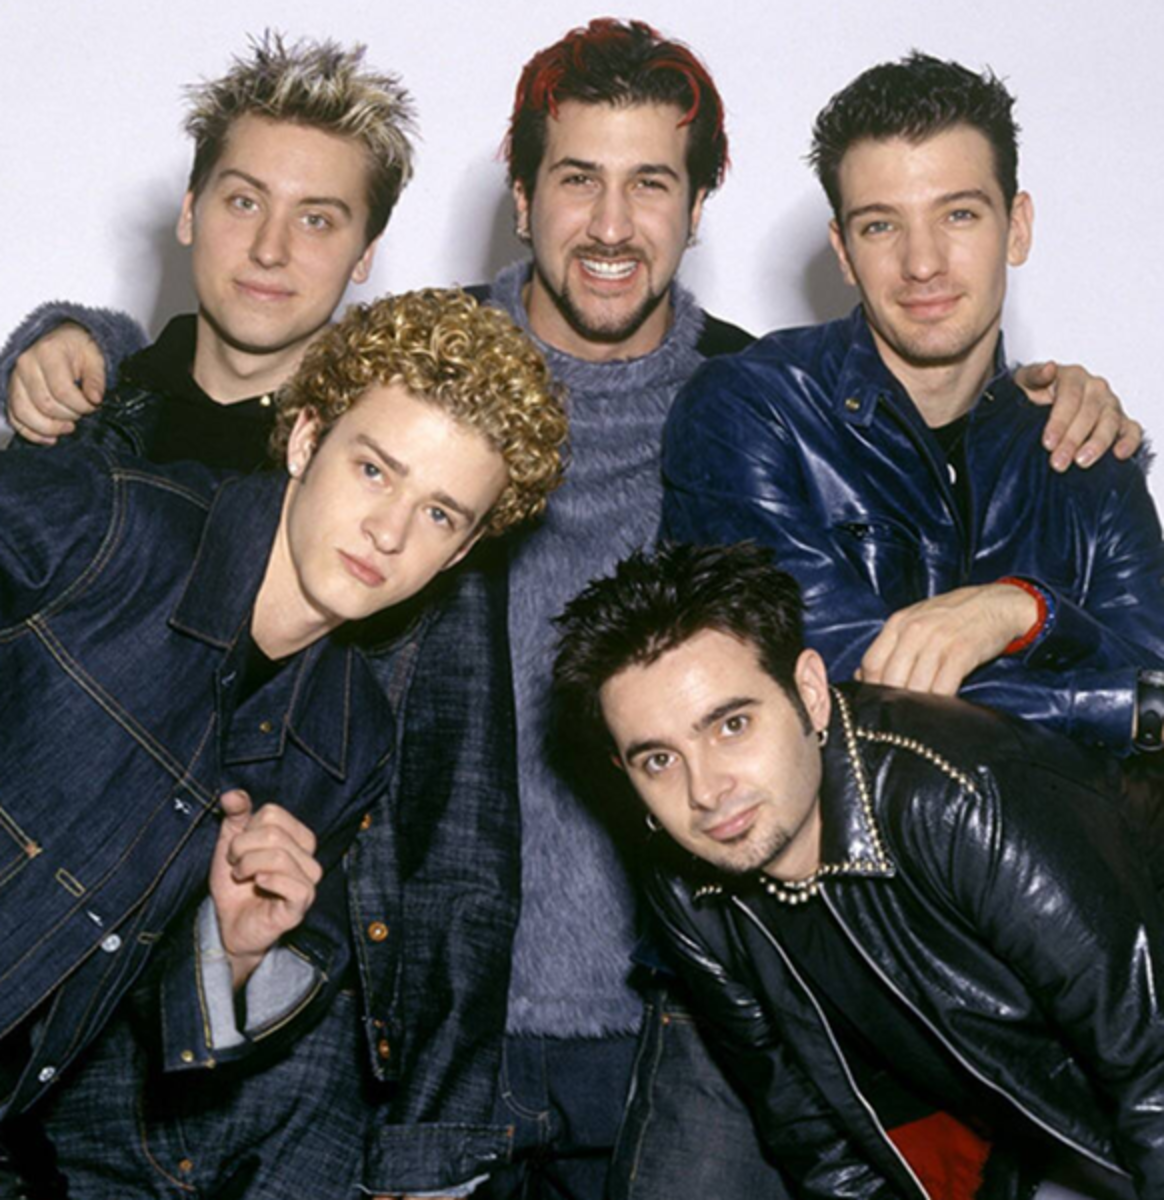 Where are (L-R) Lance, Justin, Joey, Chris, and JC of *NSYNC now?